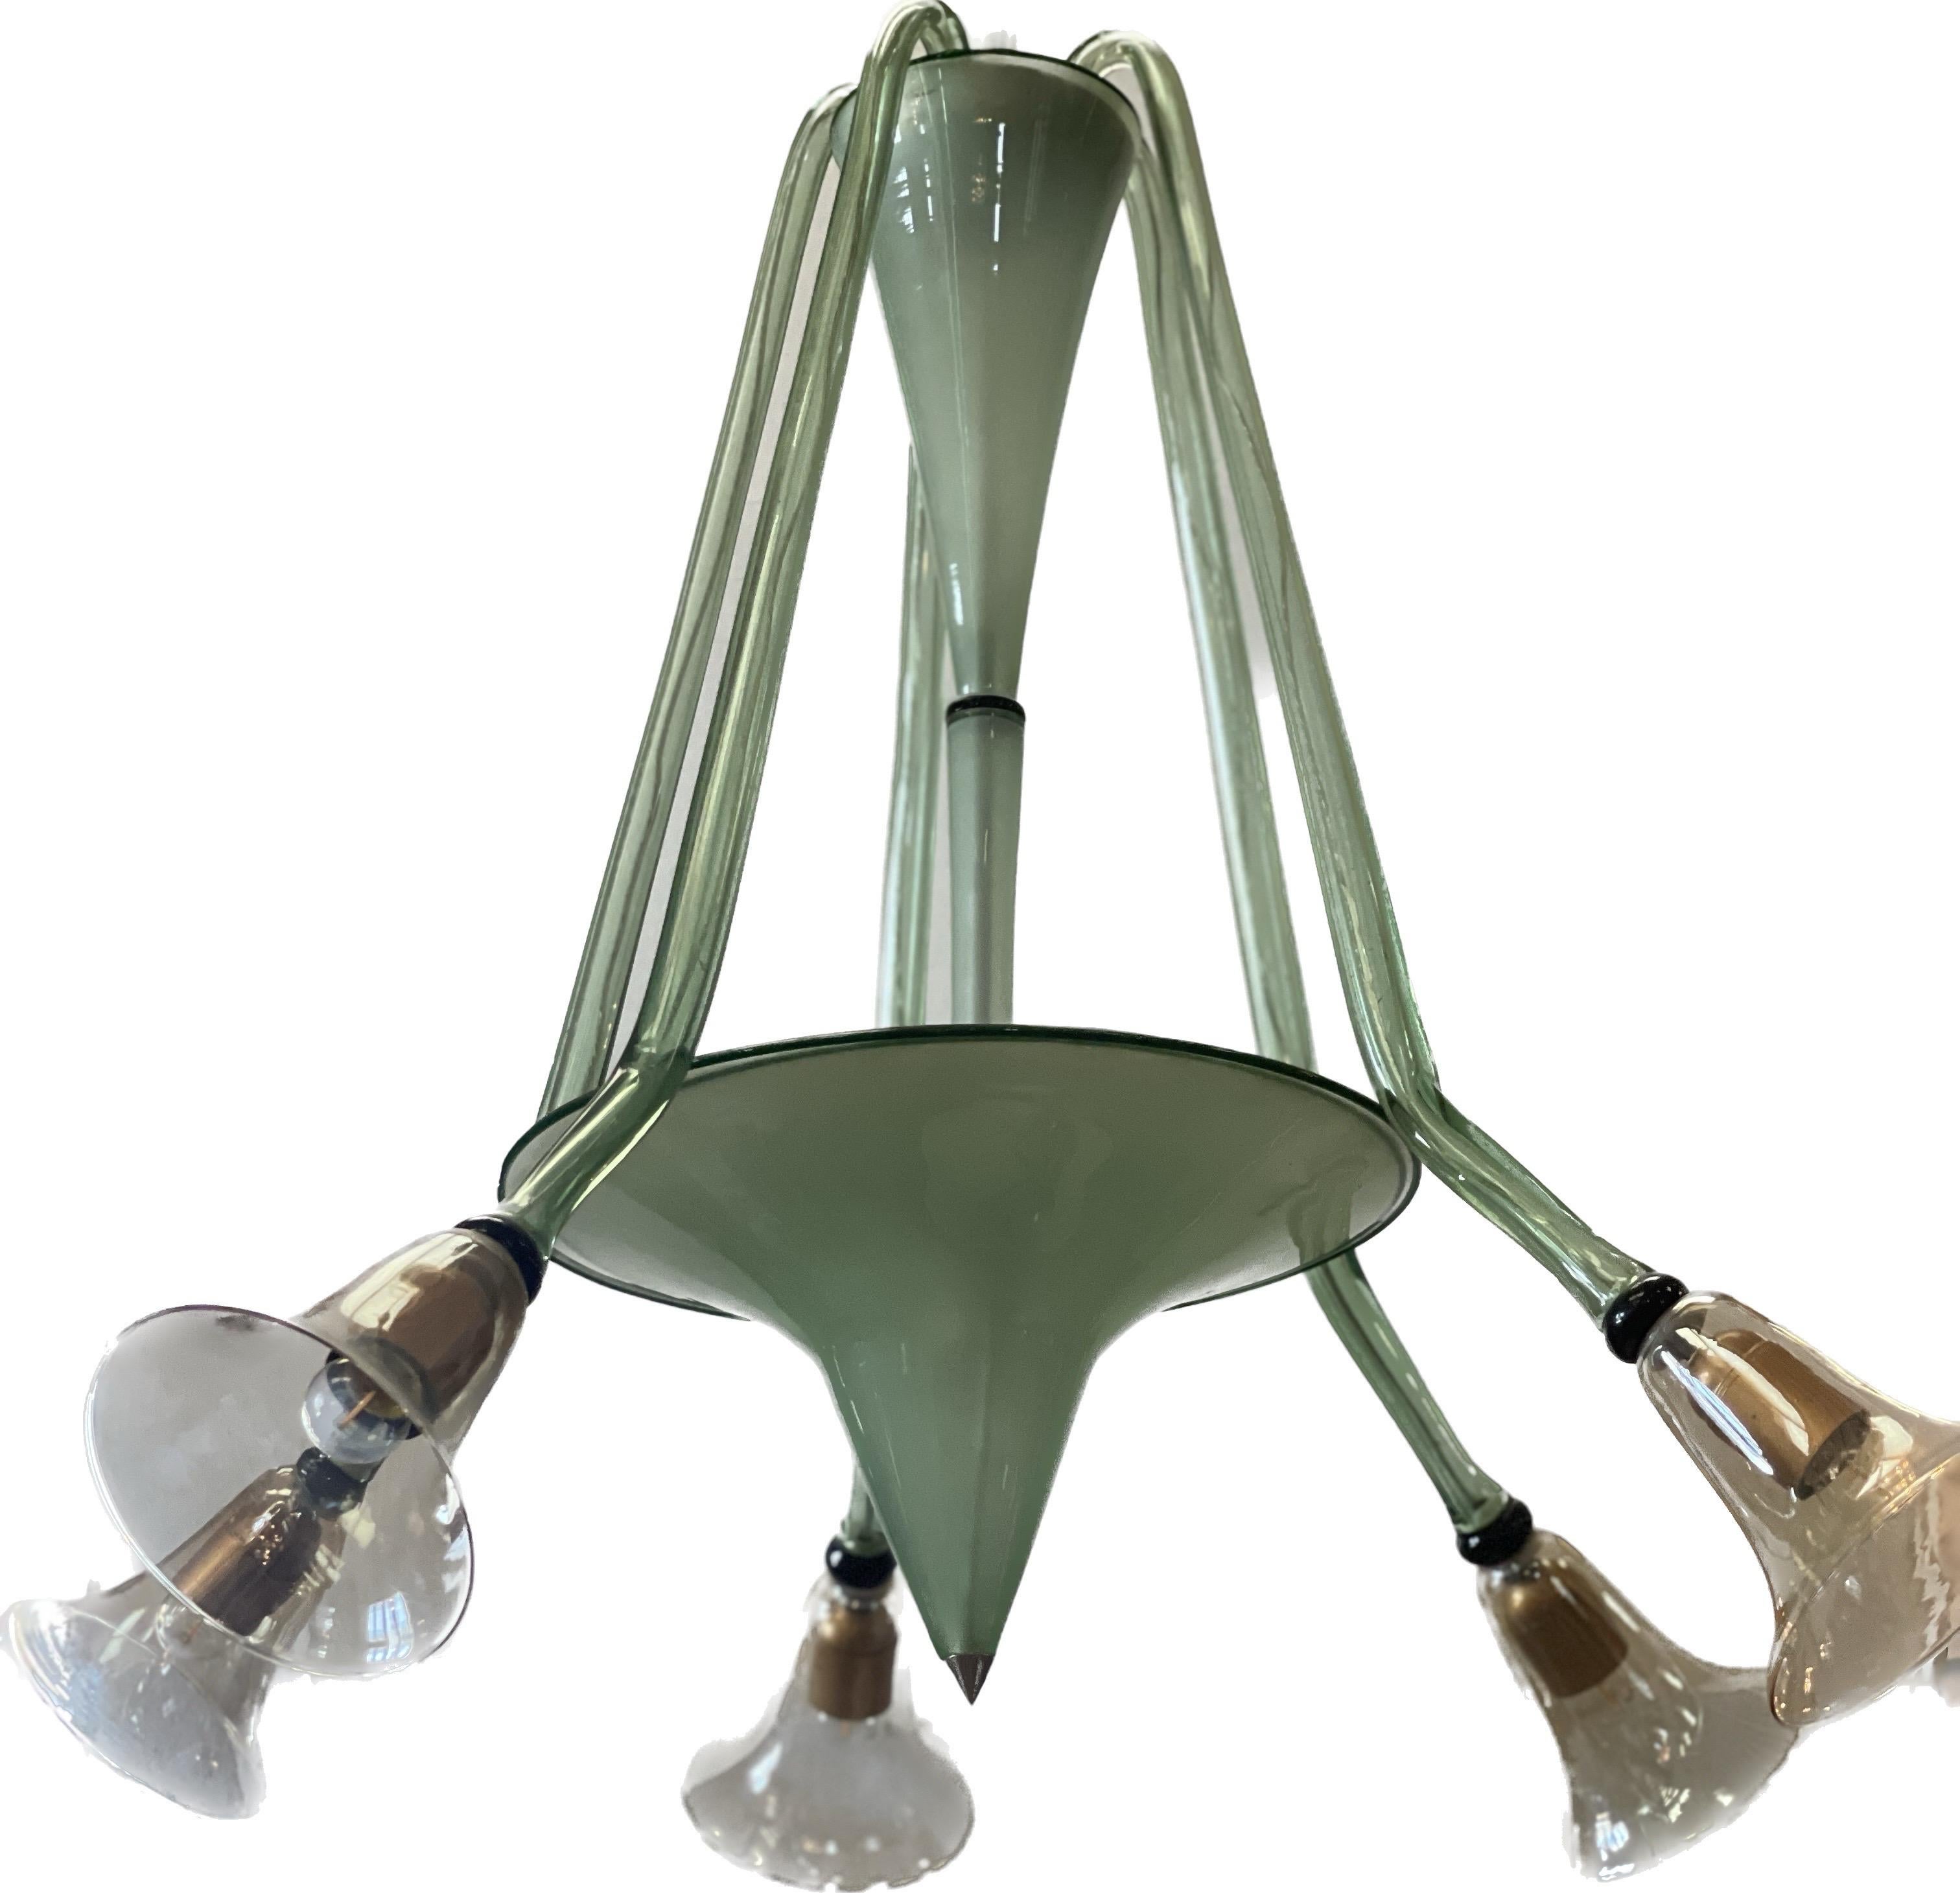 Blown Glass Murano Glass Fratelli Toso Pendant Chandelier With 5 Arms For Sale